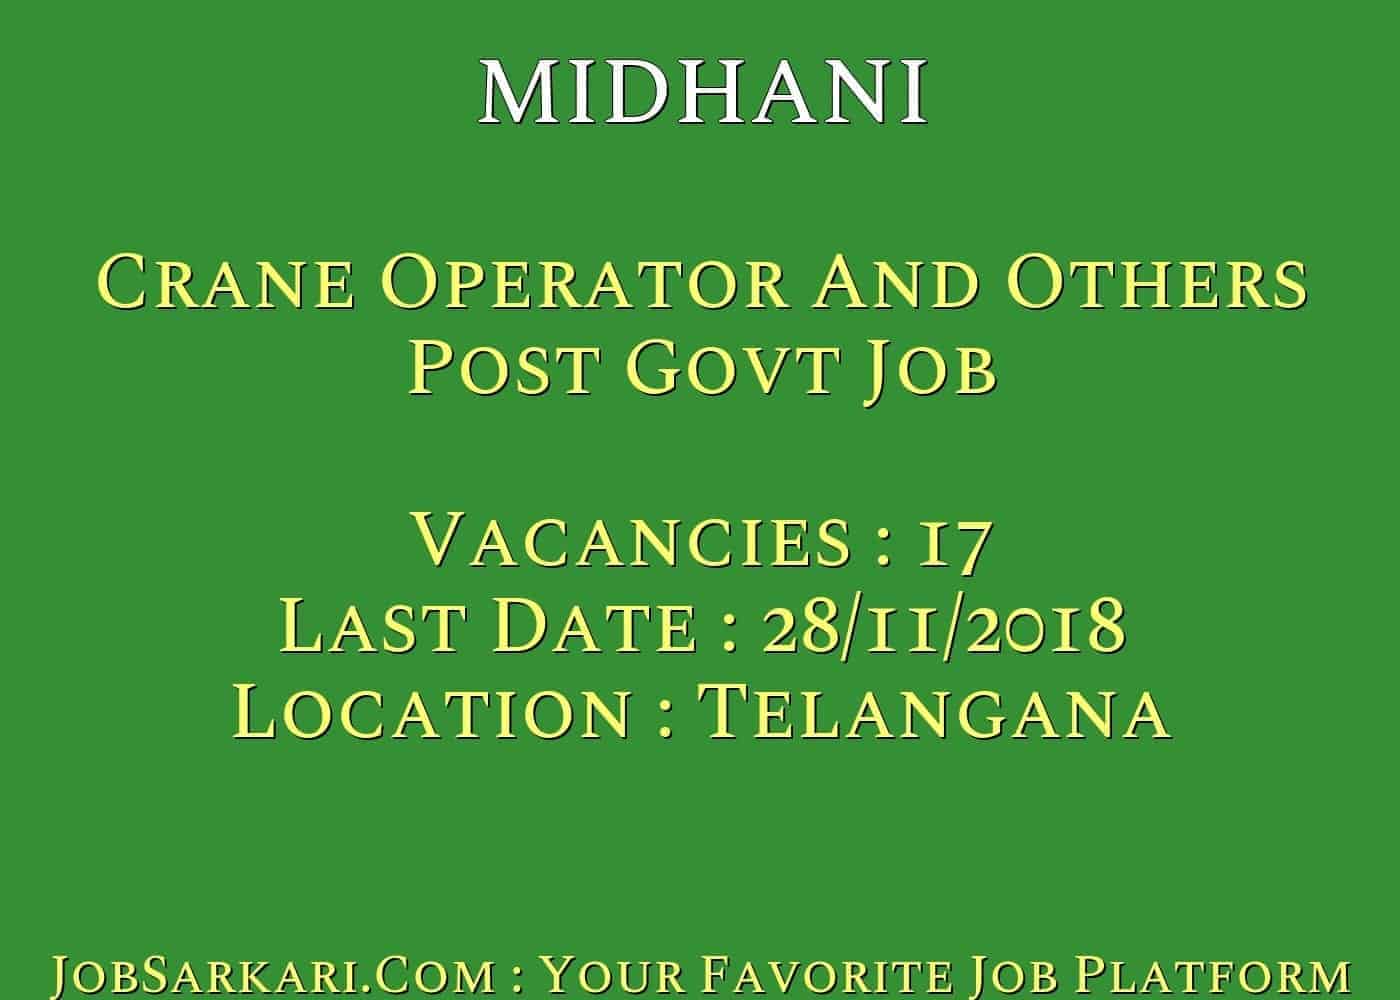 MIDHANI Recruitment 2018 For Crane Operator And Others Post Govt Job